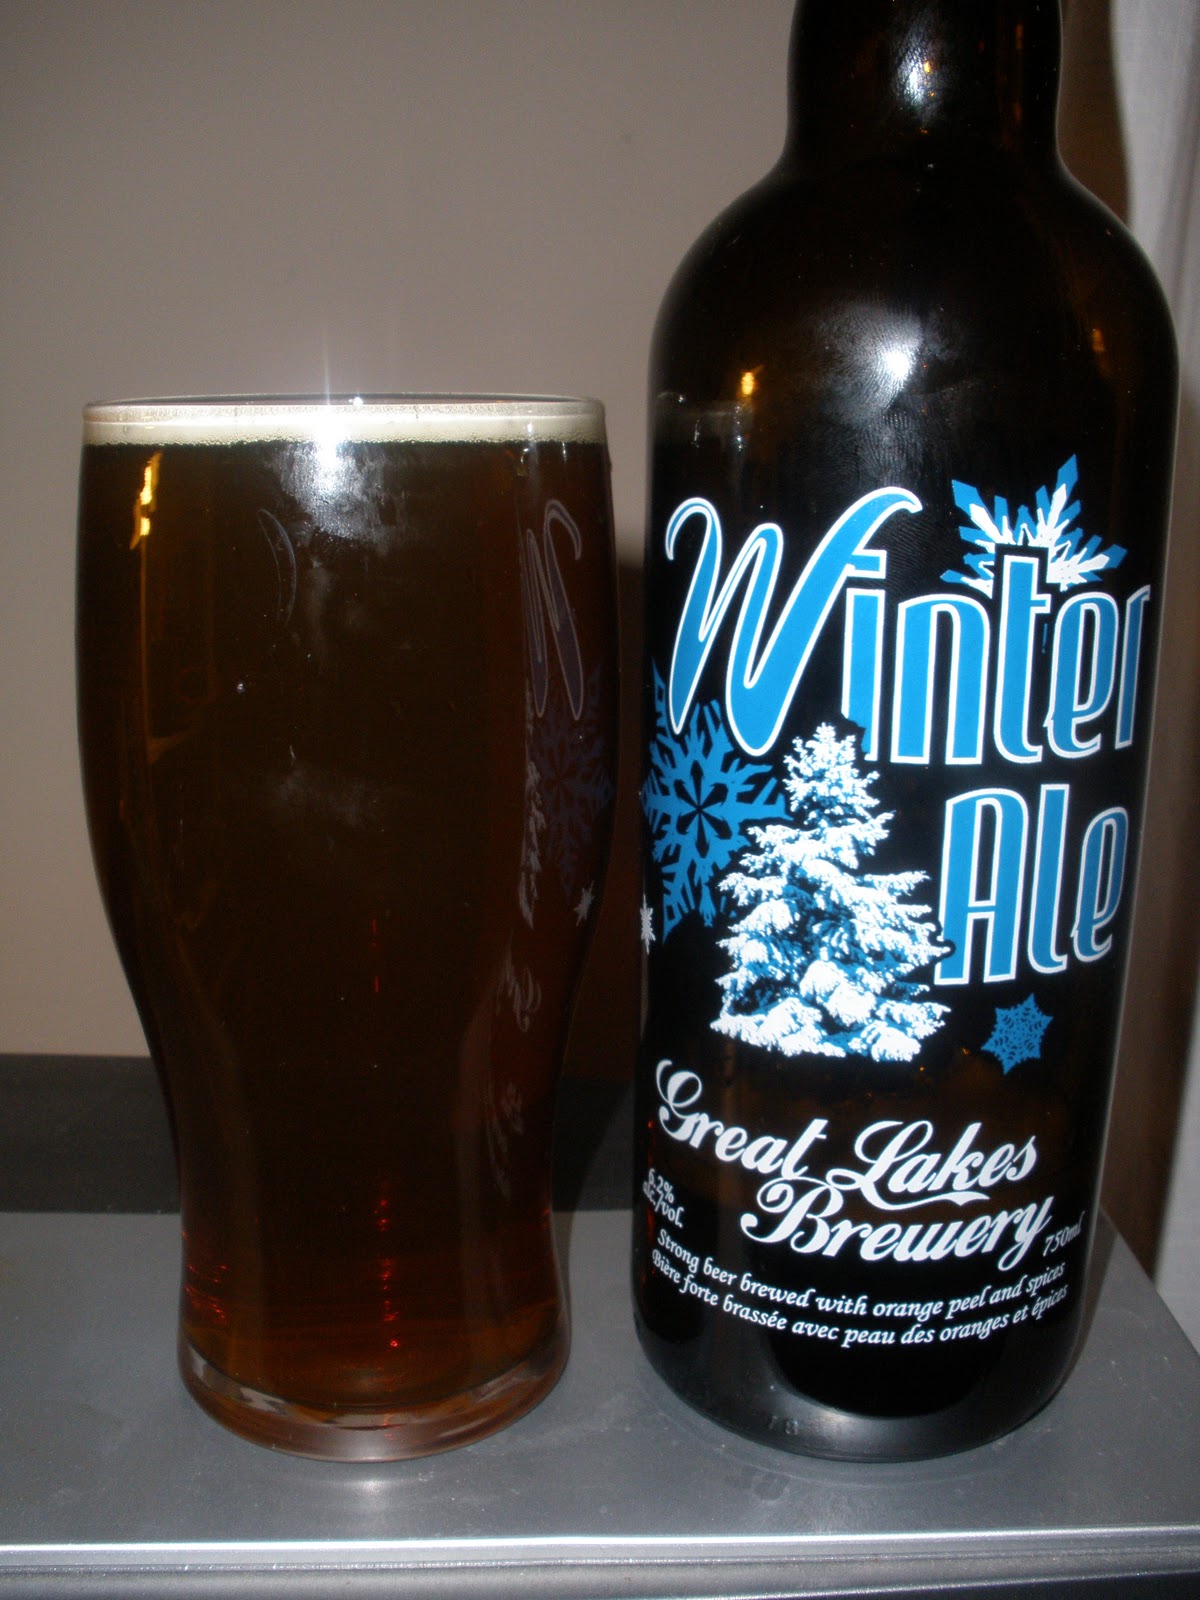 Great Lakes - Winter Ale